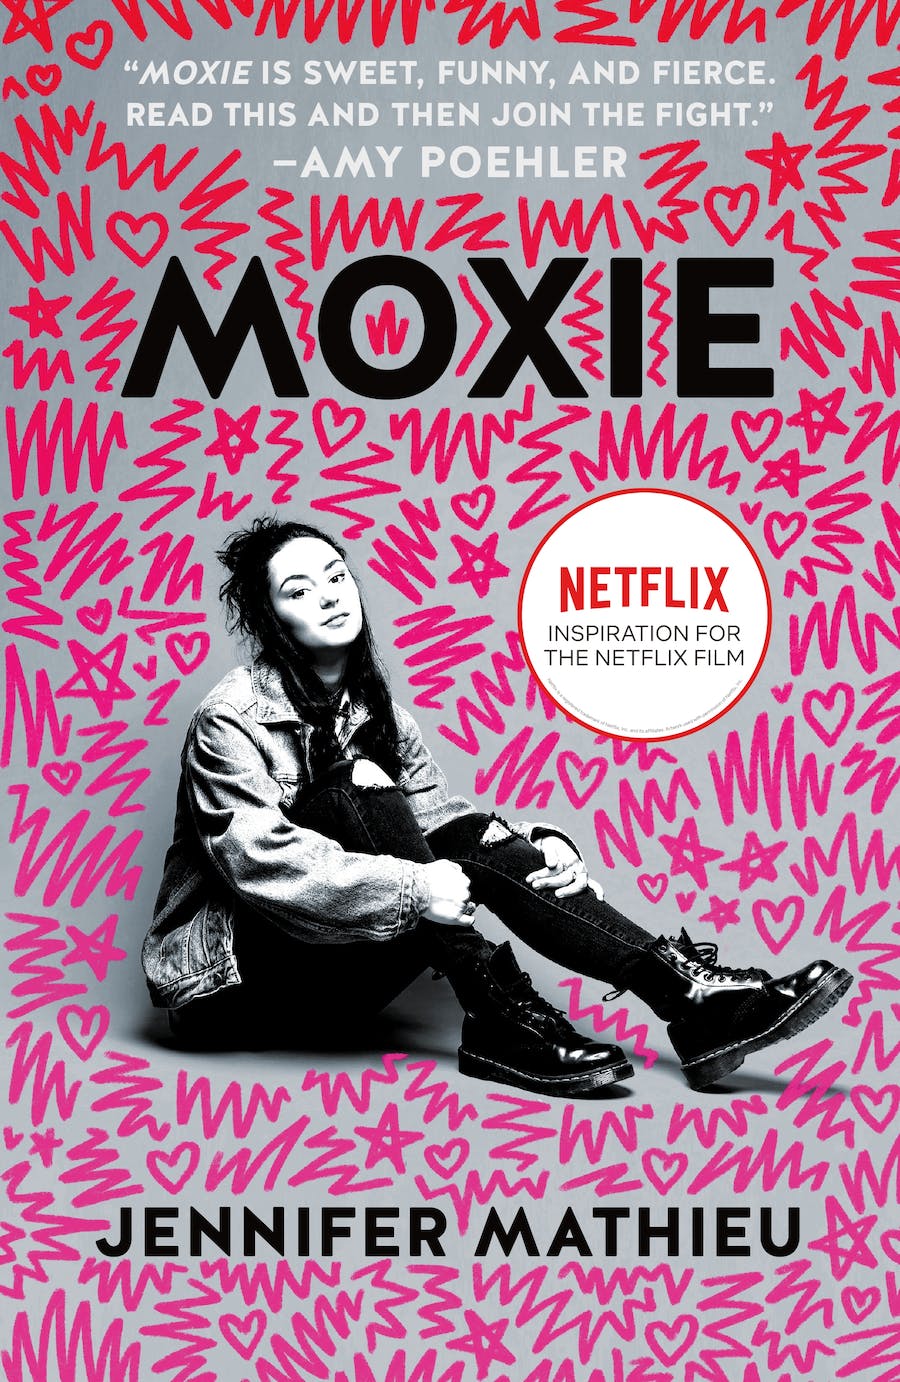 Book cover of Moxie.